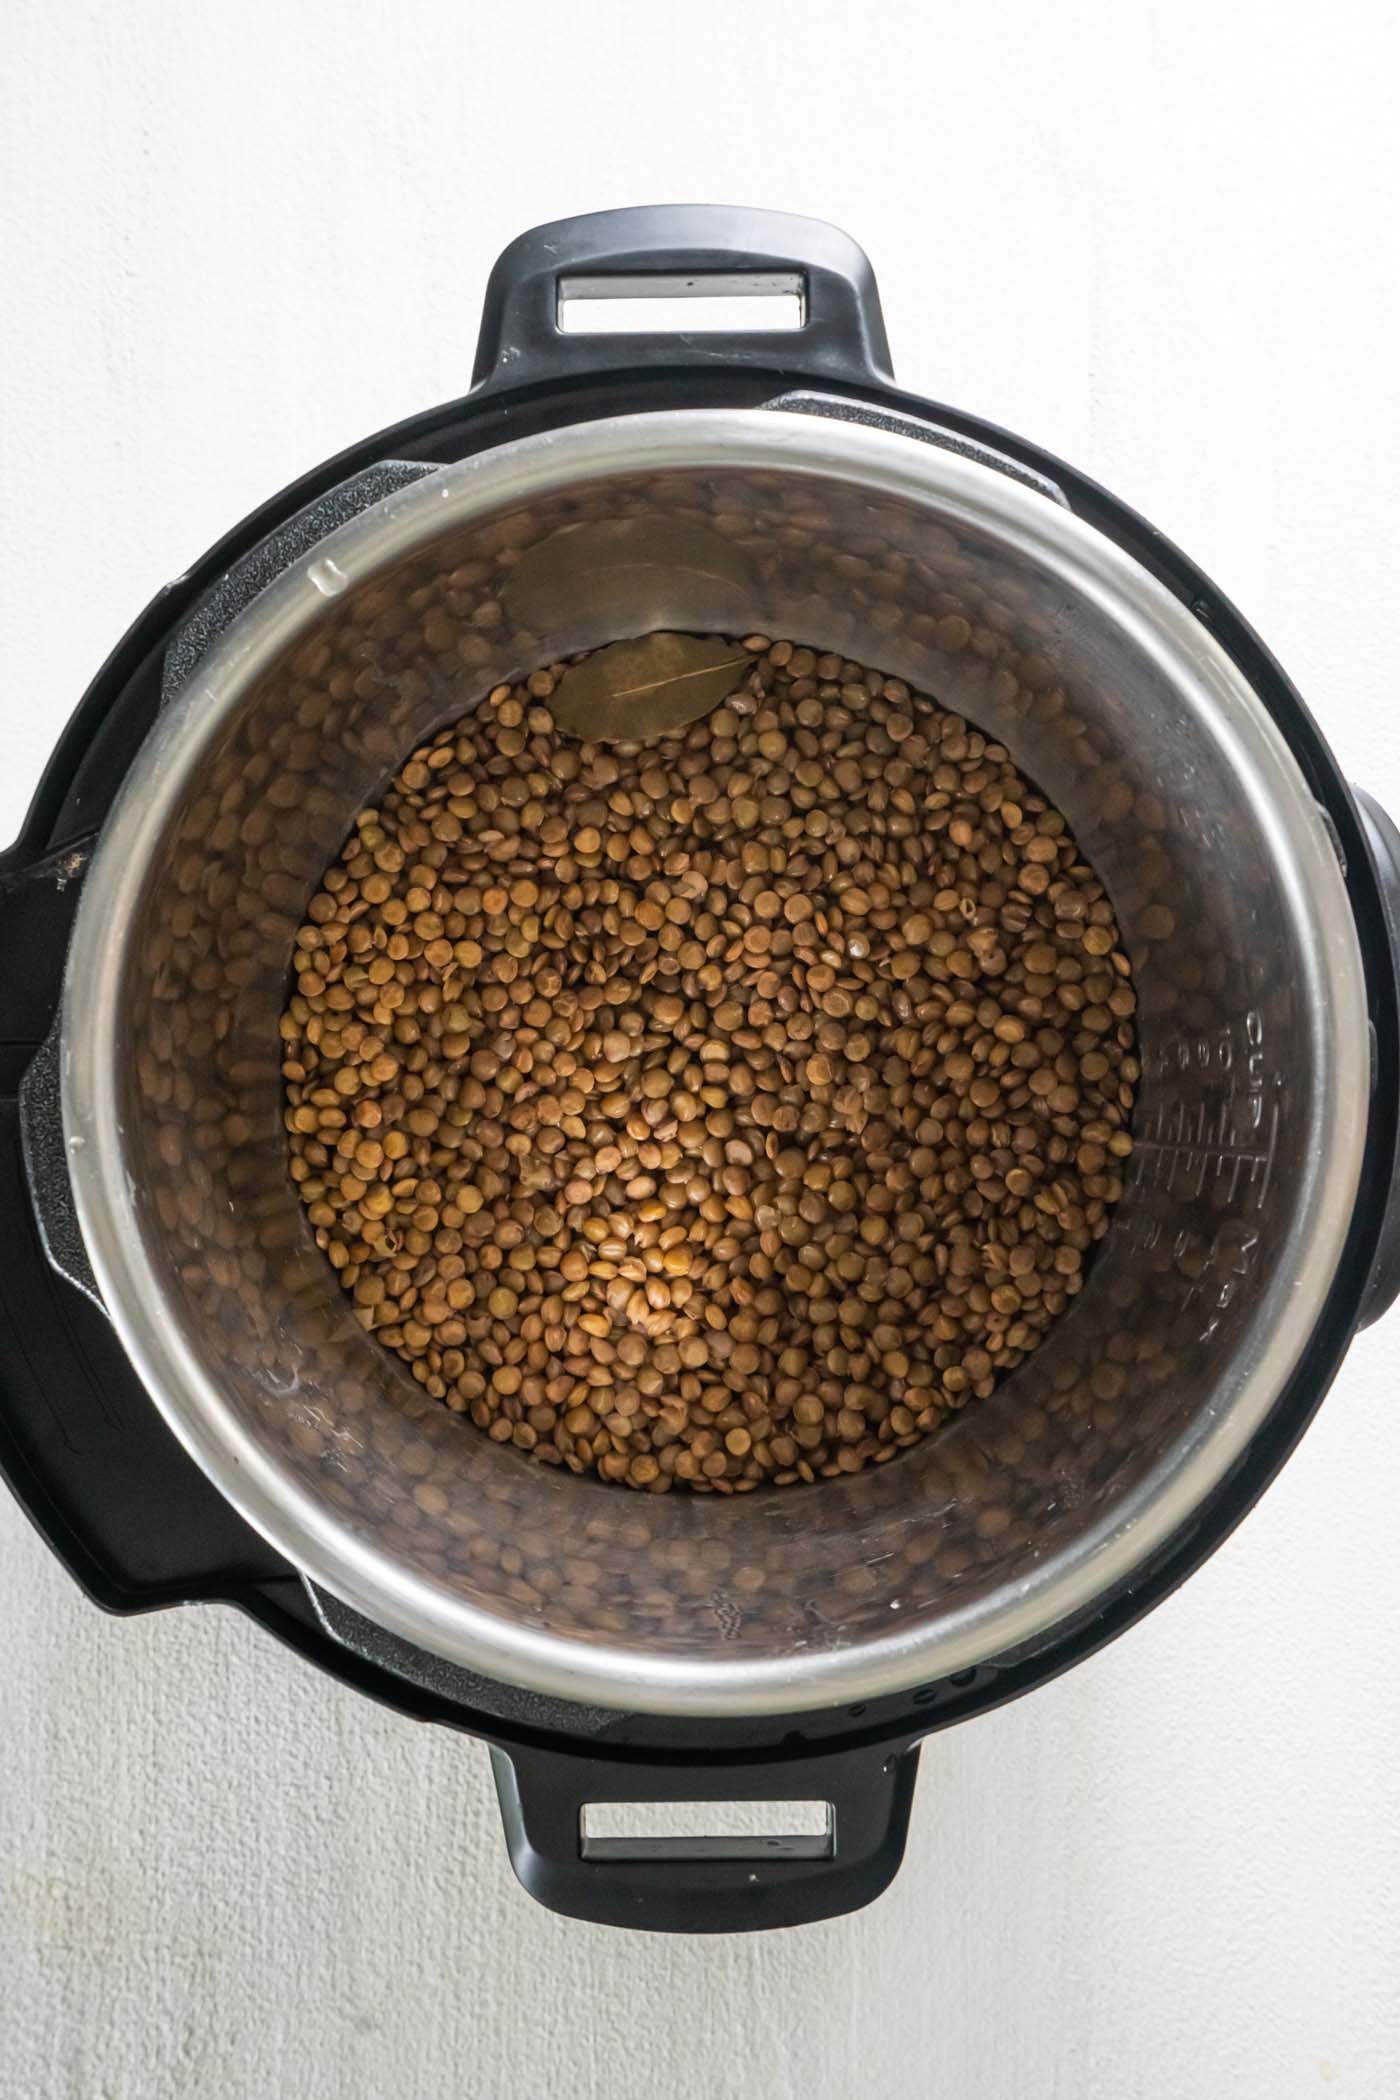 Cooked lentils in instant pot with bay leaf.